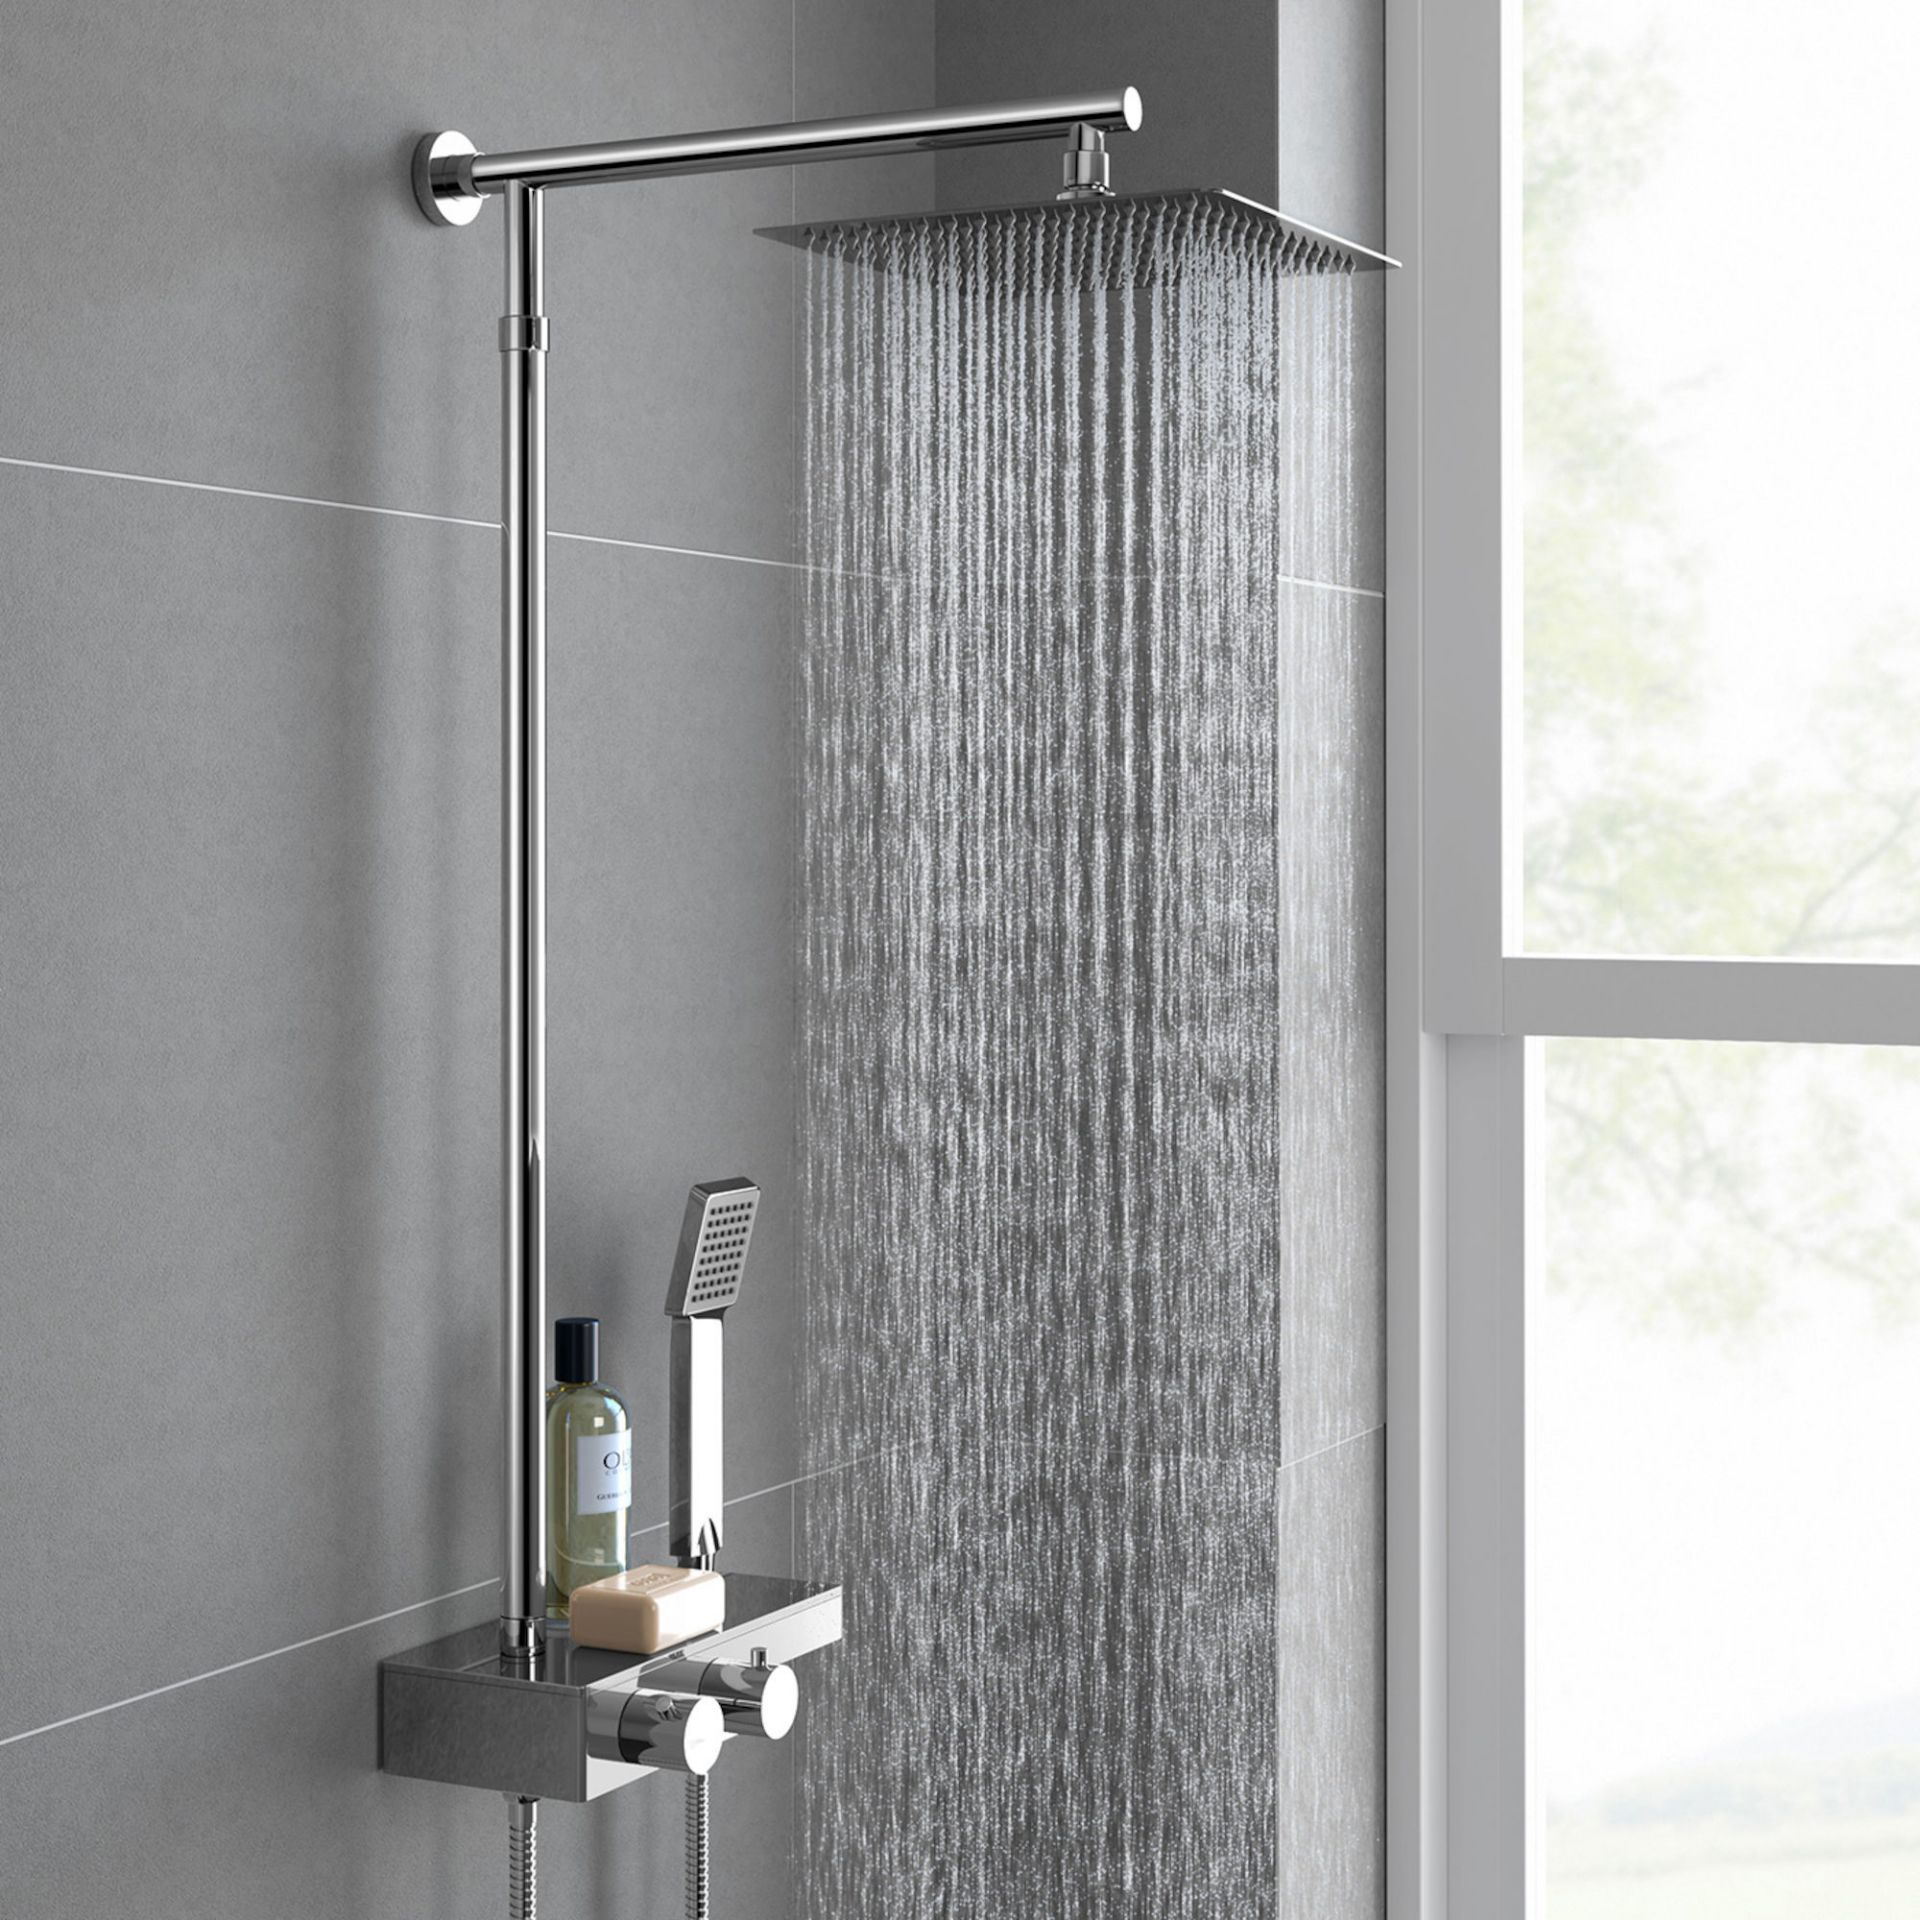 (PT63) Square Exposed Thermostatic Shower Shelf, Kit & Large Head. RRP £349.99. Style meets function